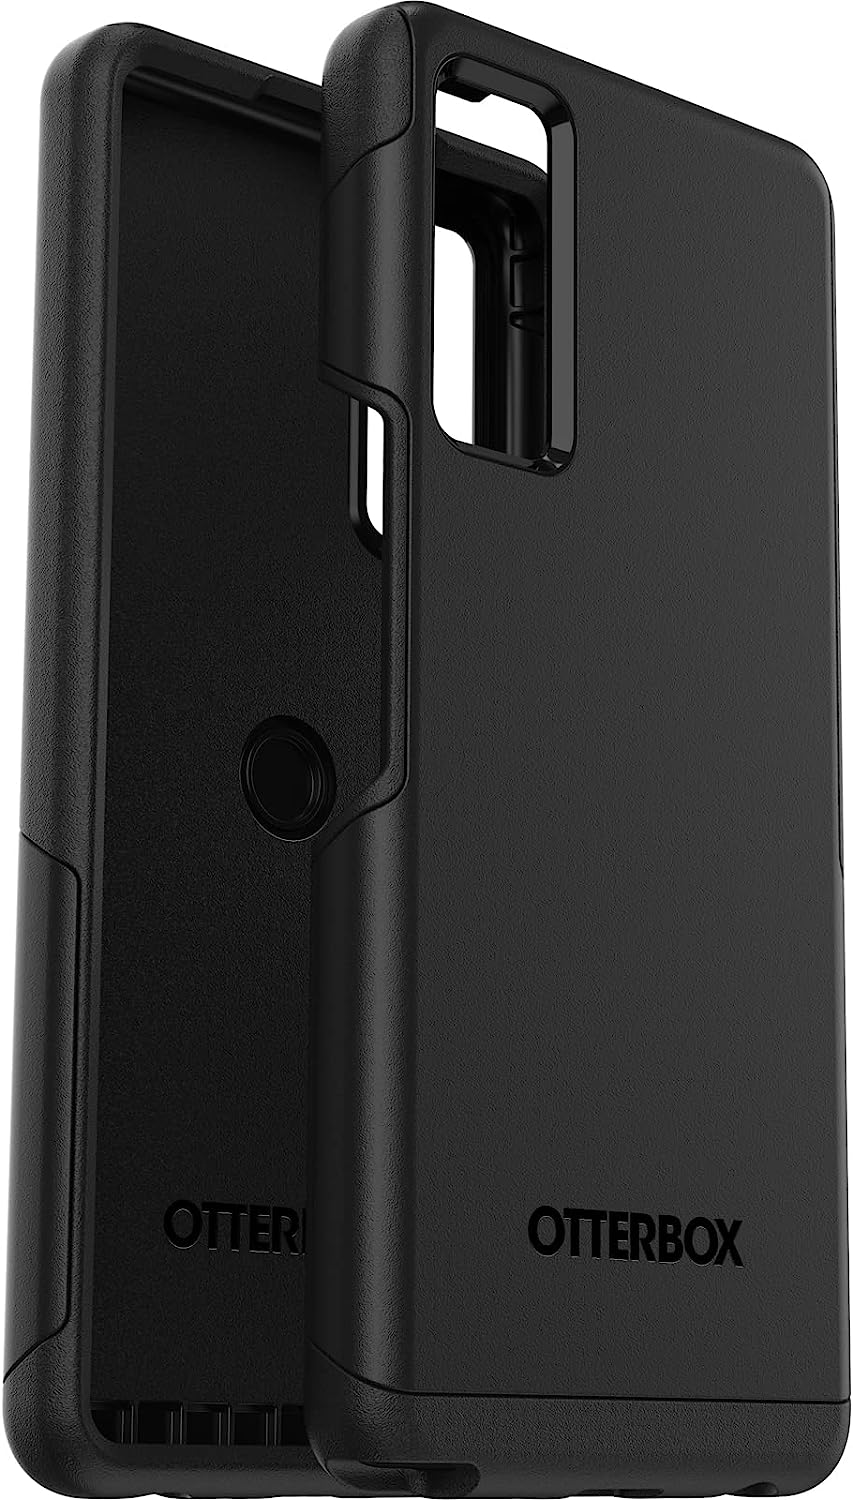 OtterBox COMMUTER LITE SERIES Case for TCL Stylus 5G - Black (New)